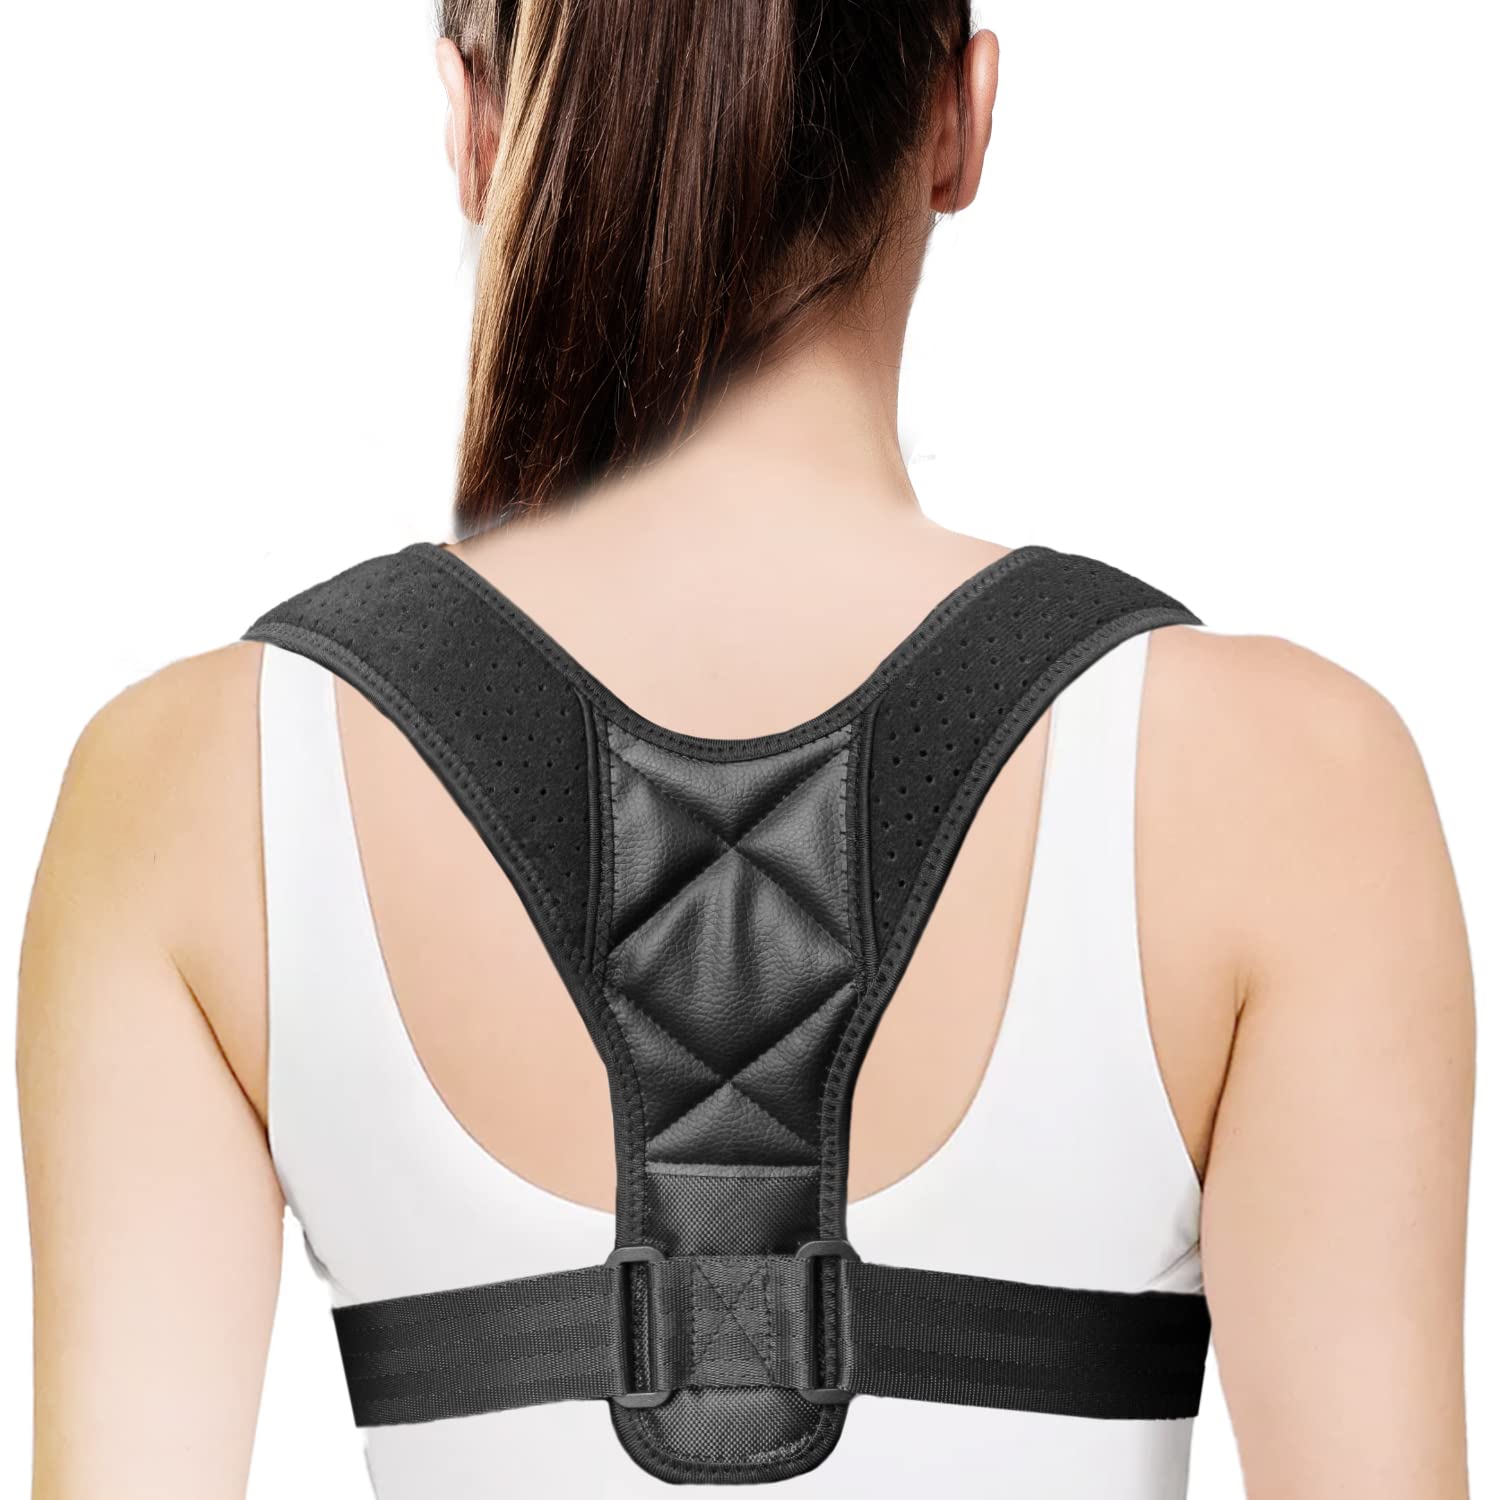 Posture Corrector for Women Back Straightener Posture Corrector Back Brace  for Women Posture Corrector Adjustable Back Straightener Support Providing  Pain Relief from Neck Back & Shoulder Under Clothes